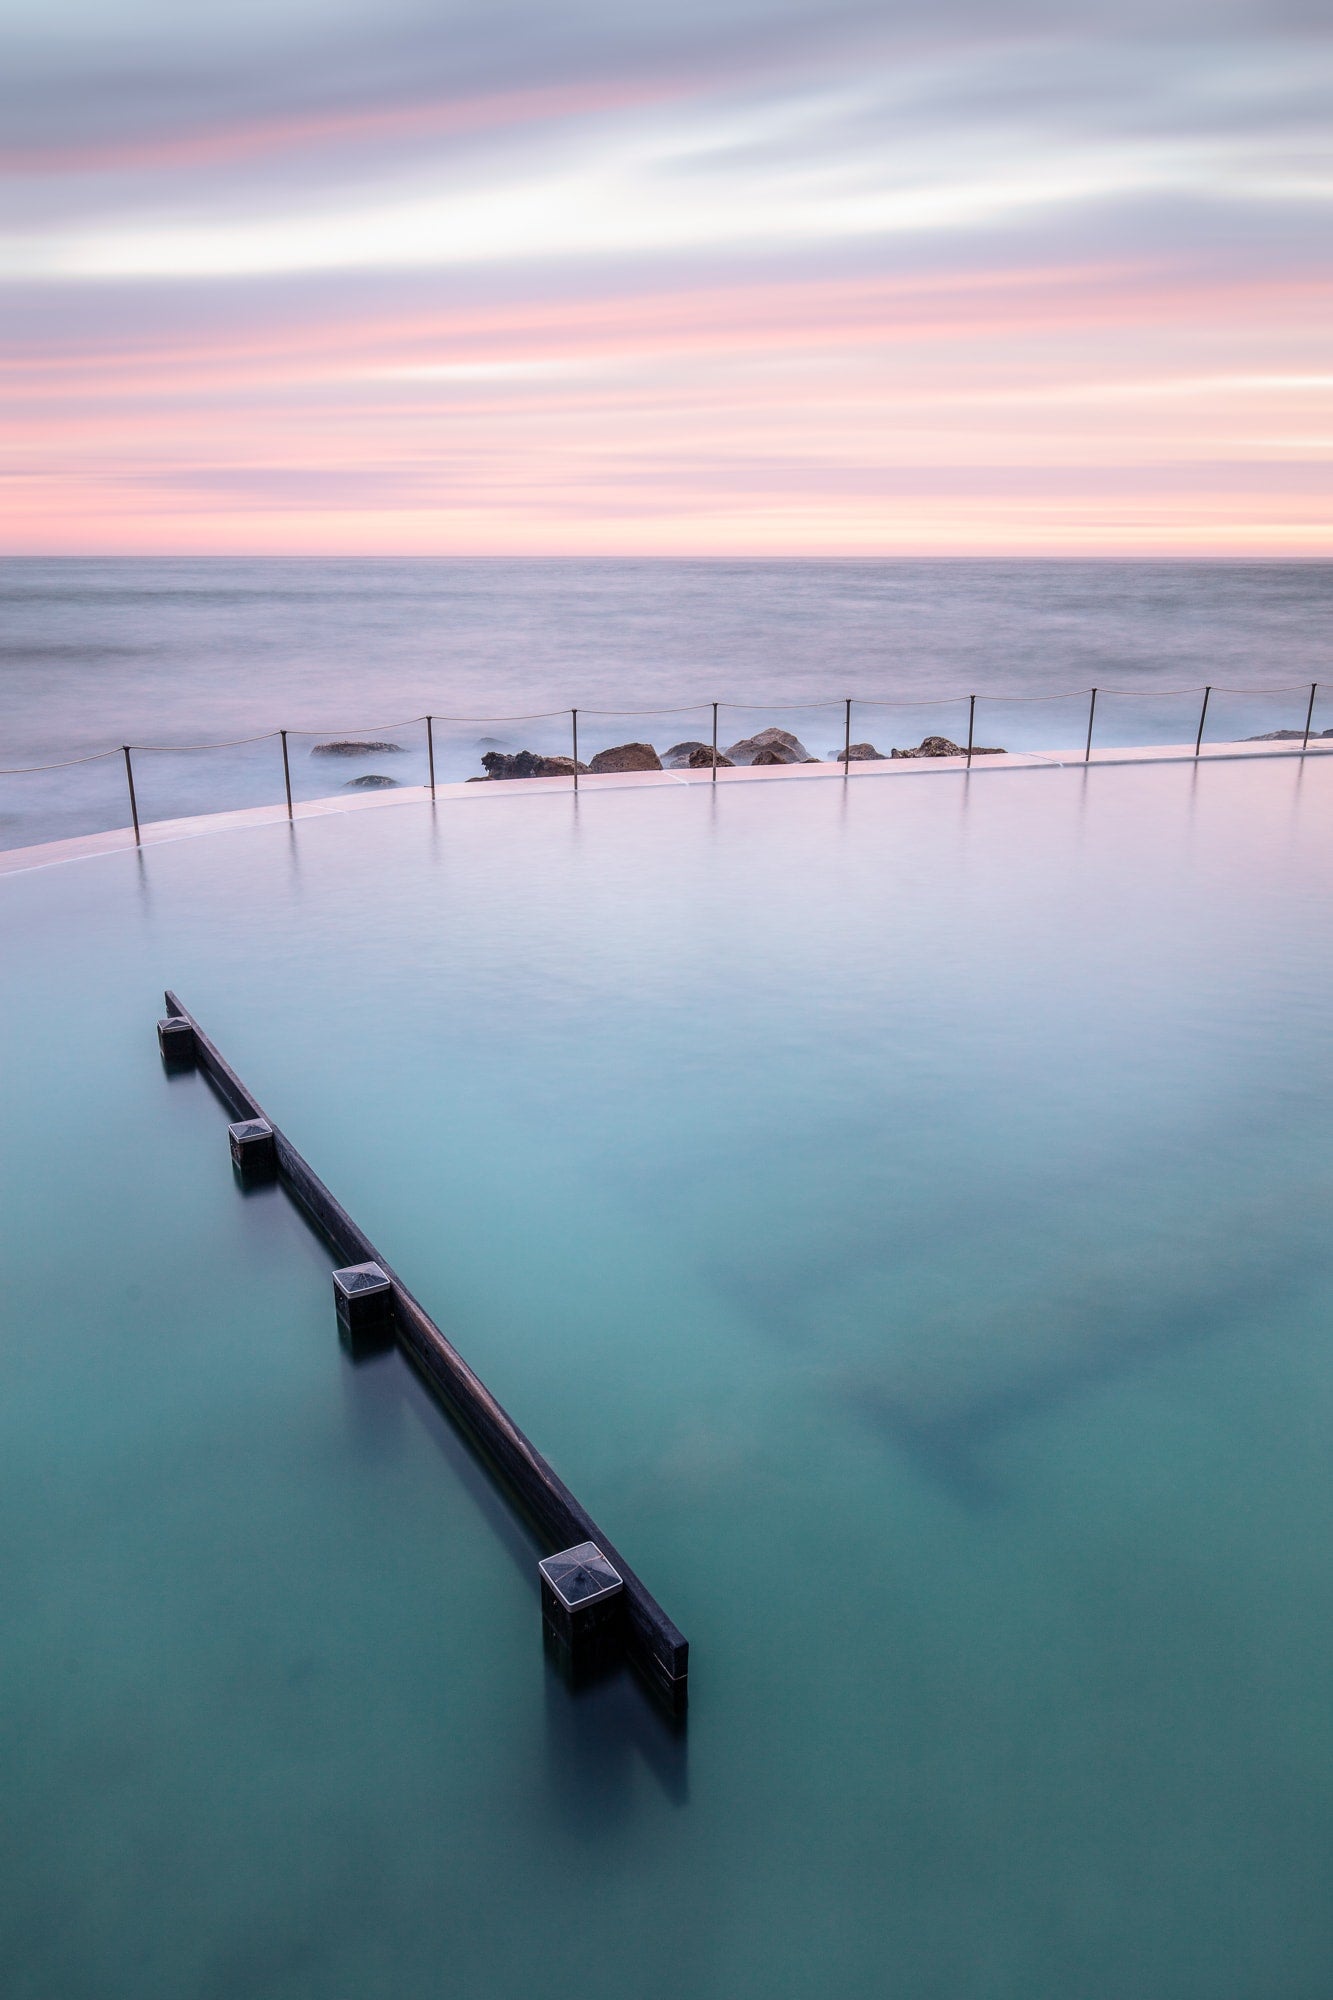 Long exposure of Bronte Baths in Sydney, with smooth waters under a pink and blue striped sky at twilight.